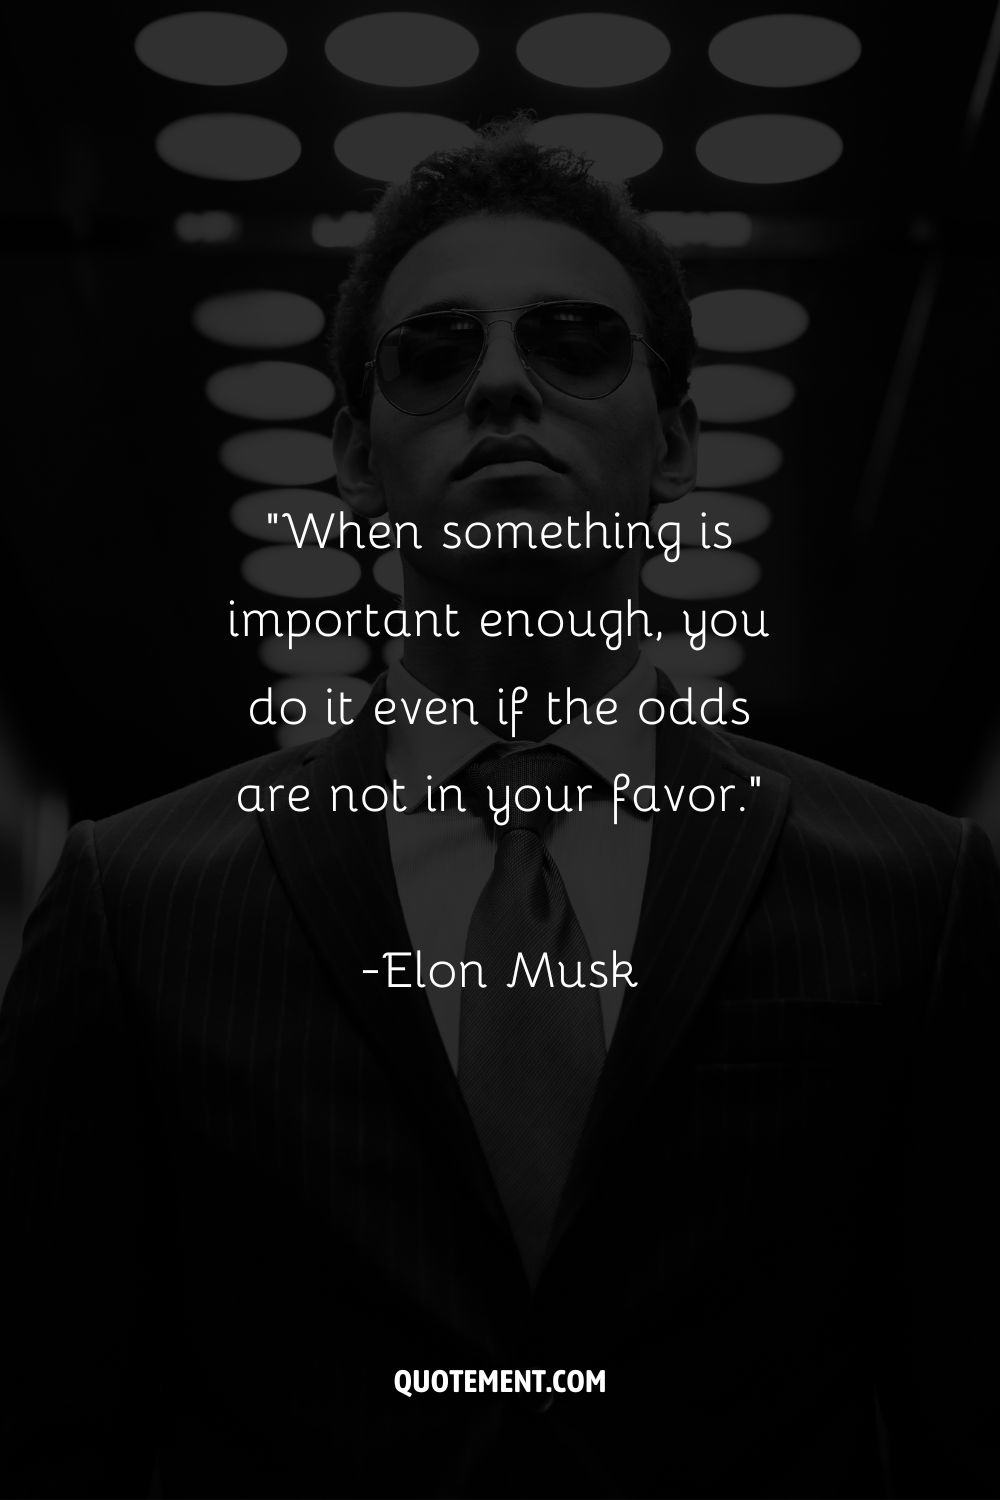 “When something is important enough, you do it even if the odds are not in your favor.”